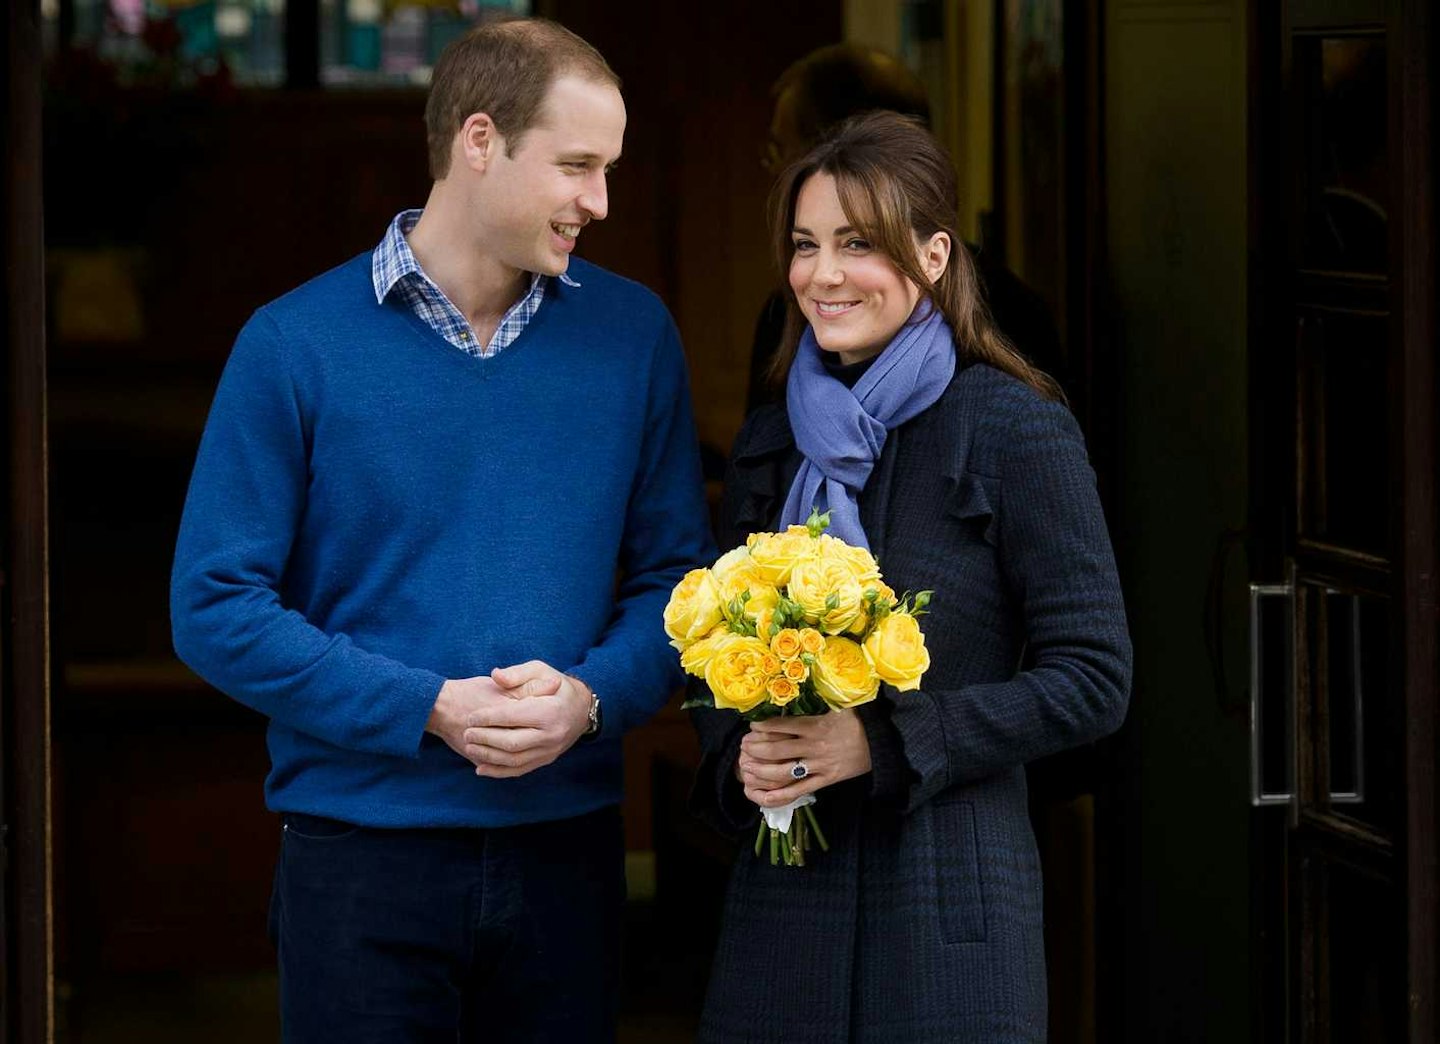 A Definitive Timeline Of Kate Middleton And Prince William's Relationship